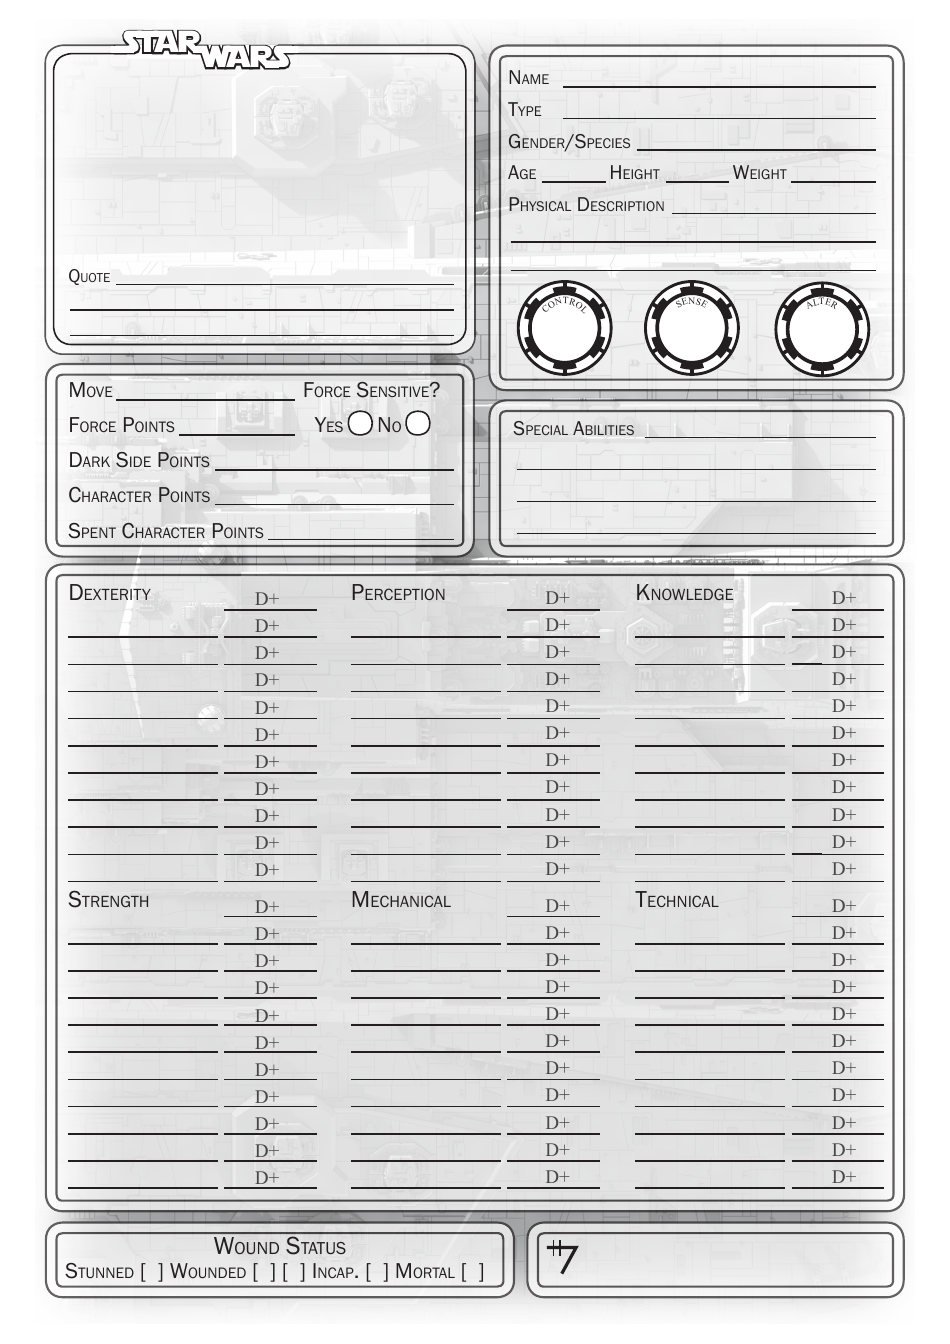 Star Wars Character Sheet Download Fillable PDF | Templateroller